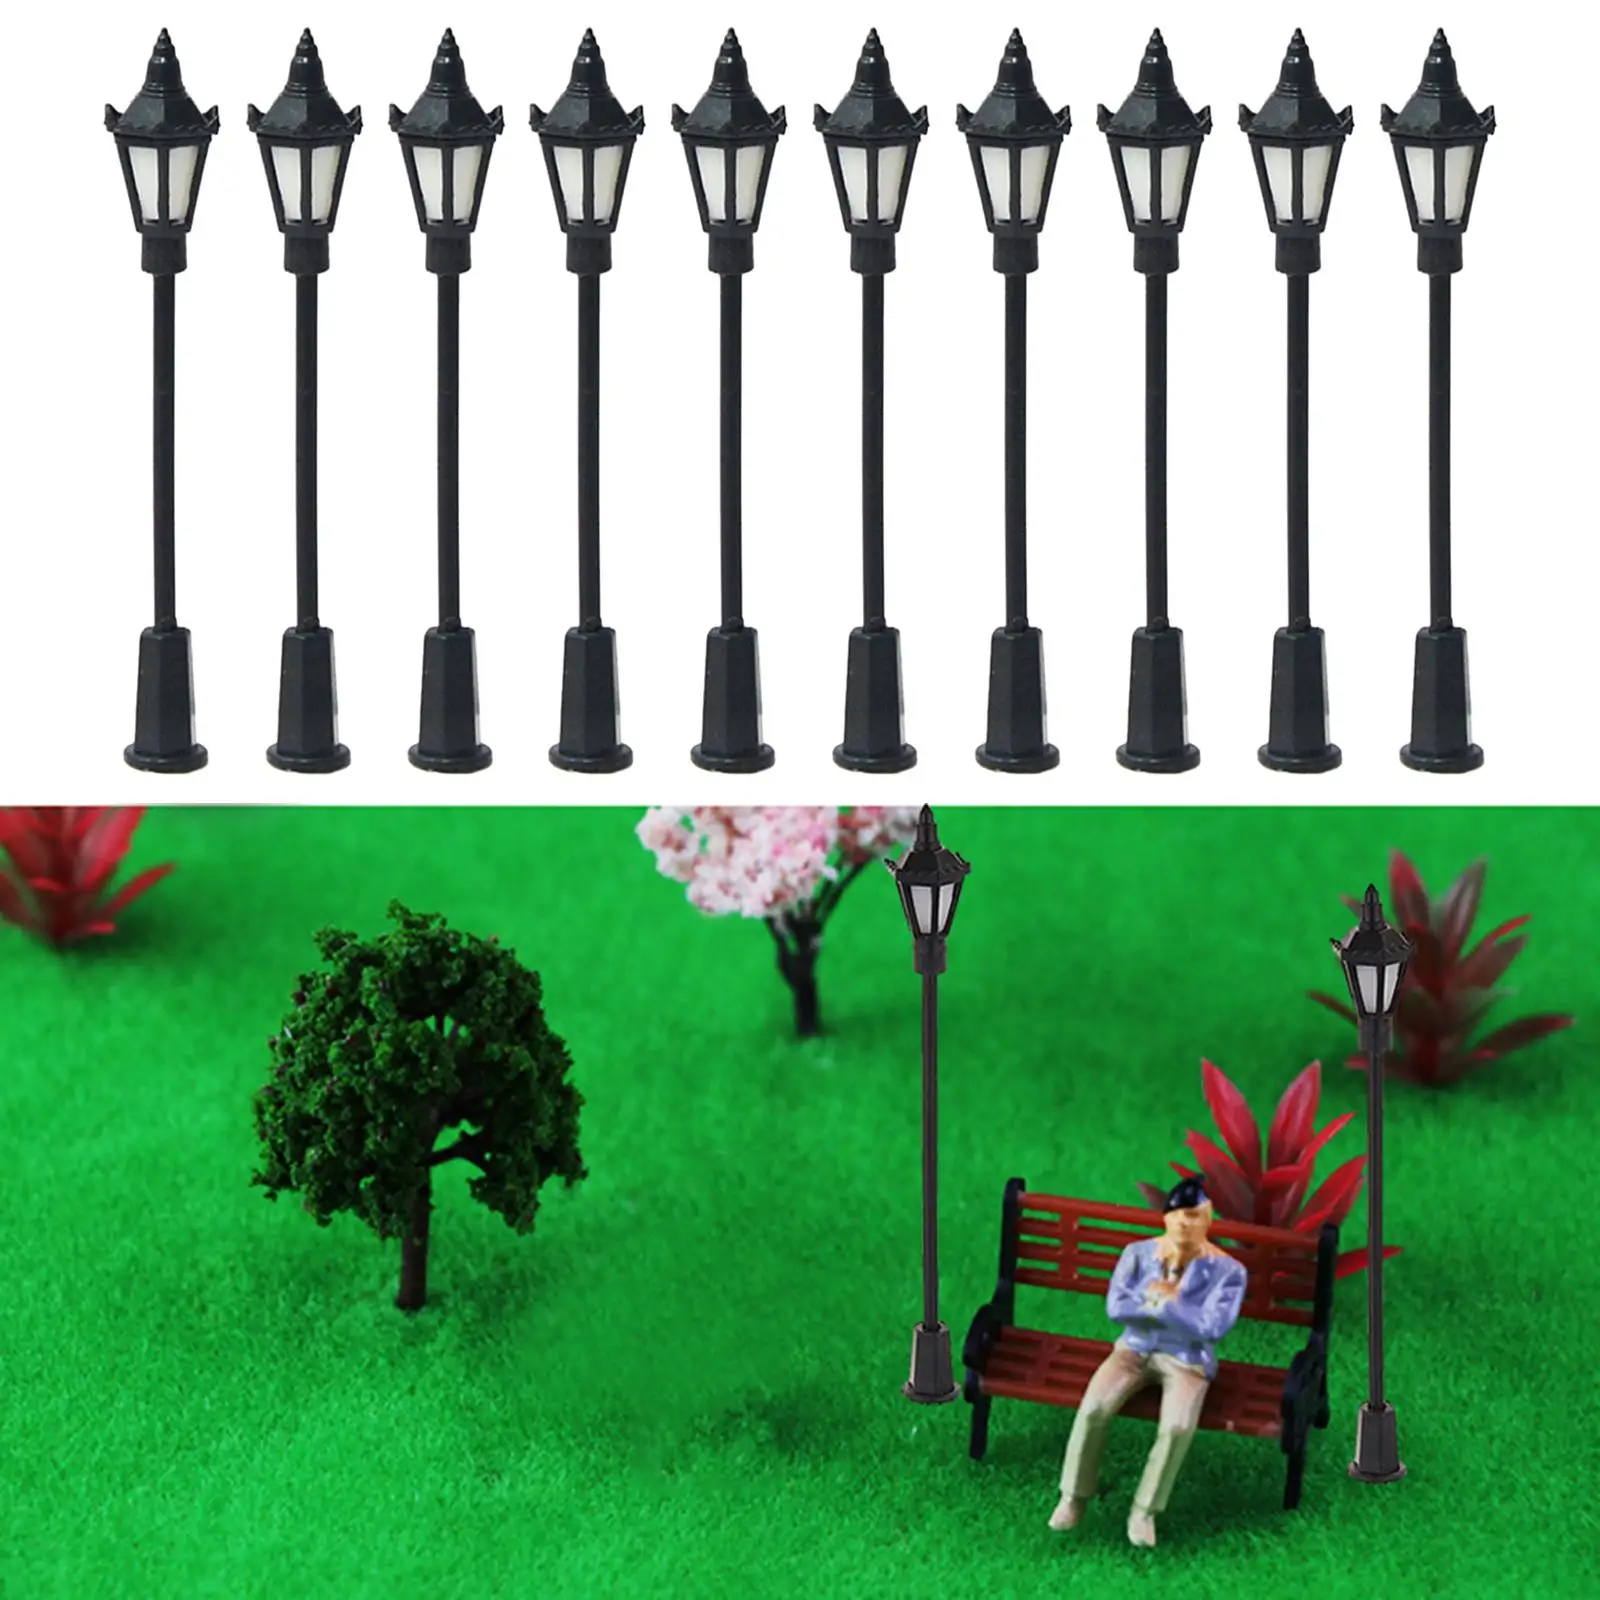 10 Pieces Model Layout Lights 1:100 Model Railway Train Model Lights for Micro Landscape Dollhouse Sand Table Layout DIY Scene